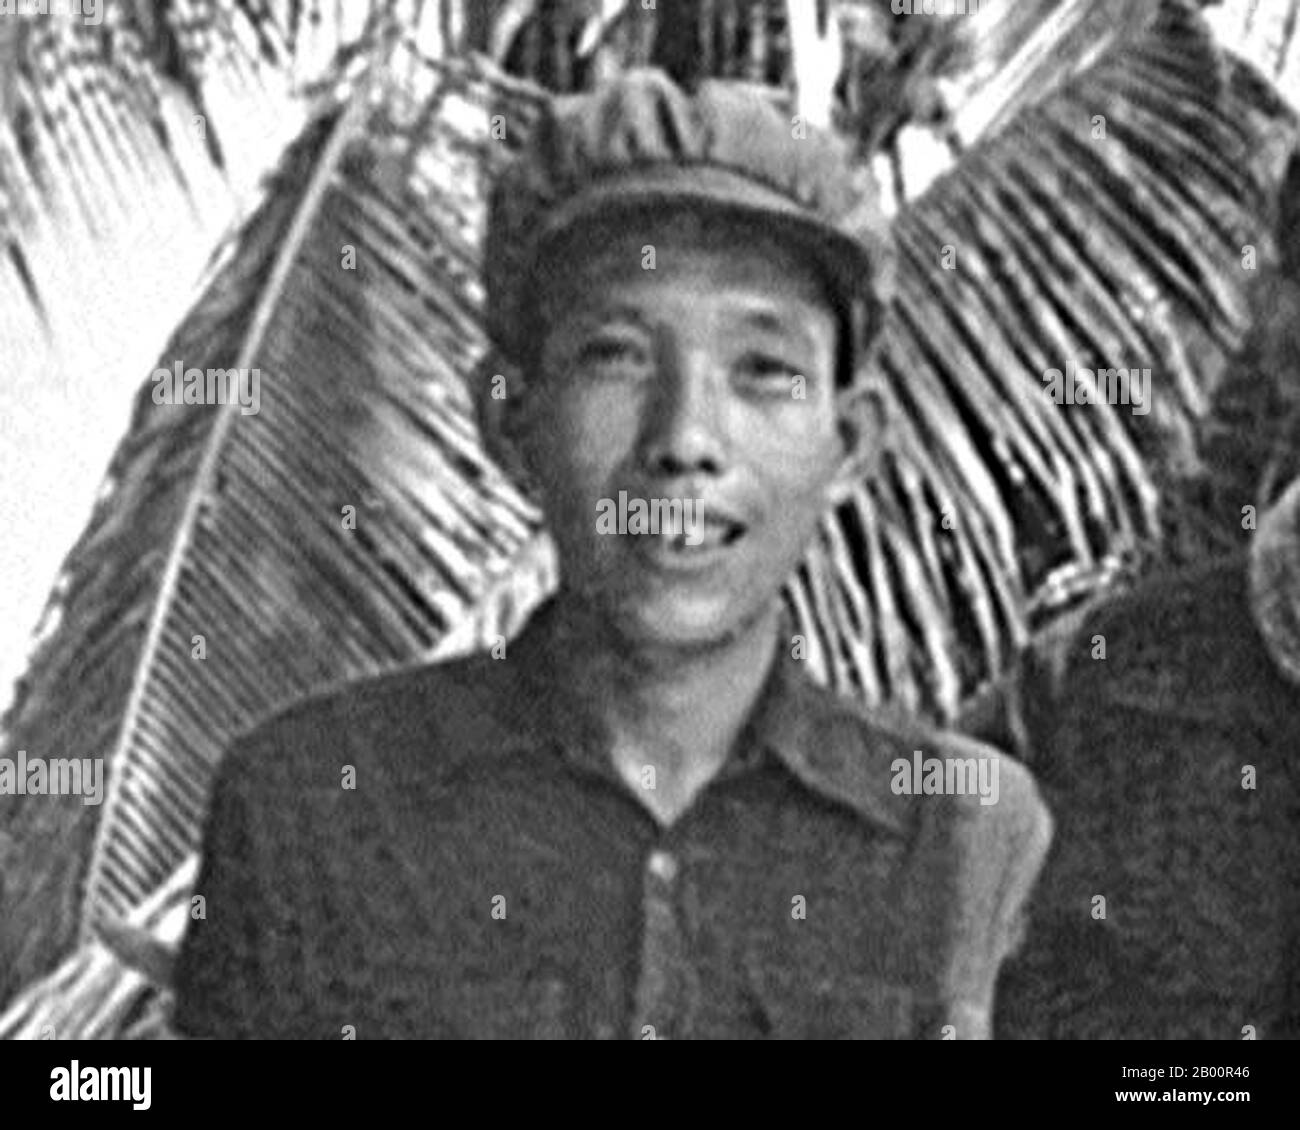 Cambodia: Kang Kek Iew (Comrade Duch) as director of Tuol Sleng (S 21) Prison, c.1976-1978.  Kang Kek Iew or Kaing Kek Iev, Kaing Guek Eav (Comrade Duch or Deuch), a Sino-Khmer with the Chinese name Hang Pin, was born 17 November 1942 in Choyaot village, Kampong Chen subdistrict, Kampong Thom Province. He is best known for heading the Khmer Rouge special branch (Santebal) and running the infamous Tuol Sleng (S-21) prison camp in Phnom Penh. He was the first Khmer Rouge leader to be tried and convicted by the Extraordinary Chambers in the Courts of Cambodia for the crimes of the regime. Stock Photo